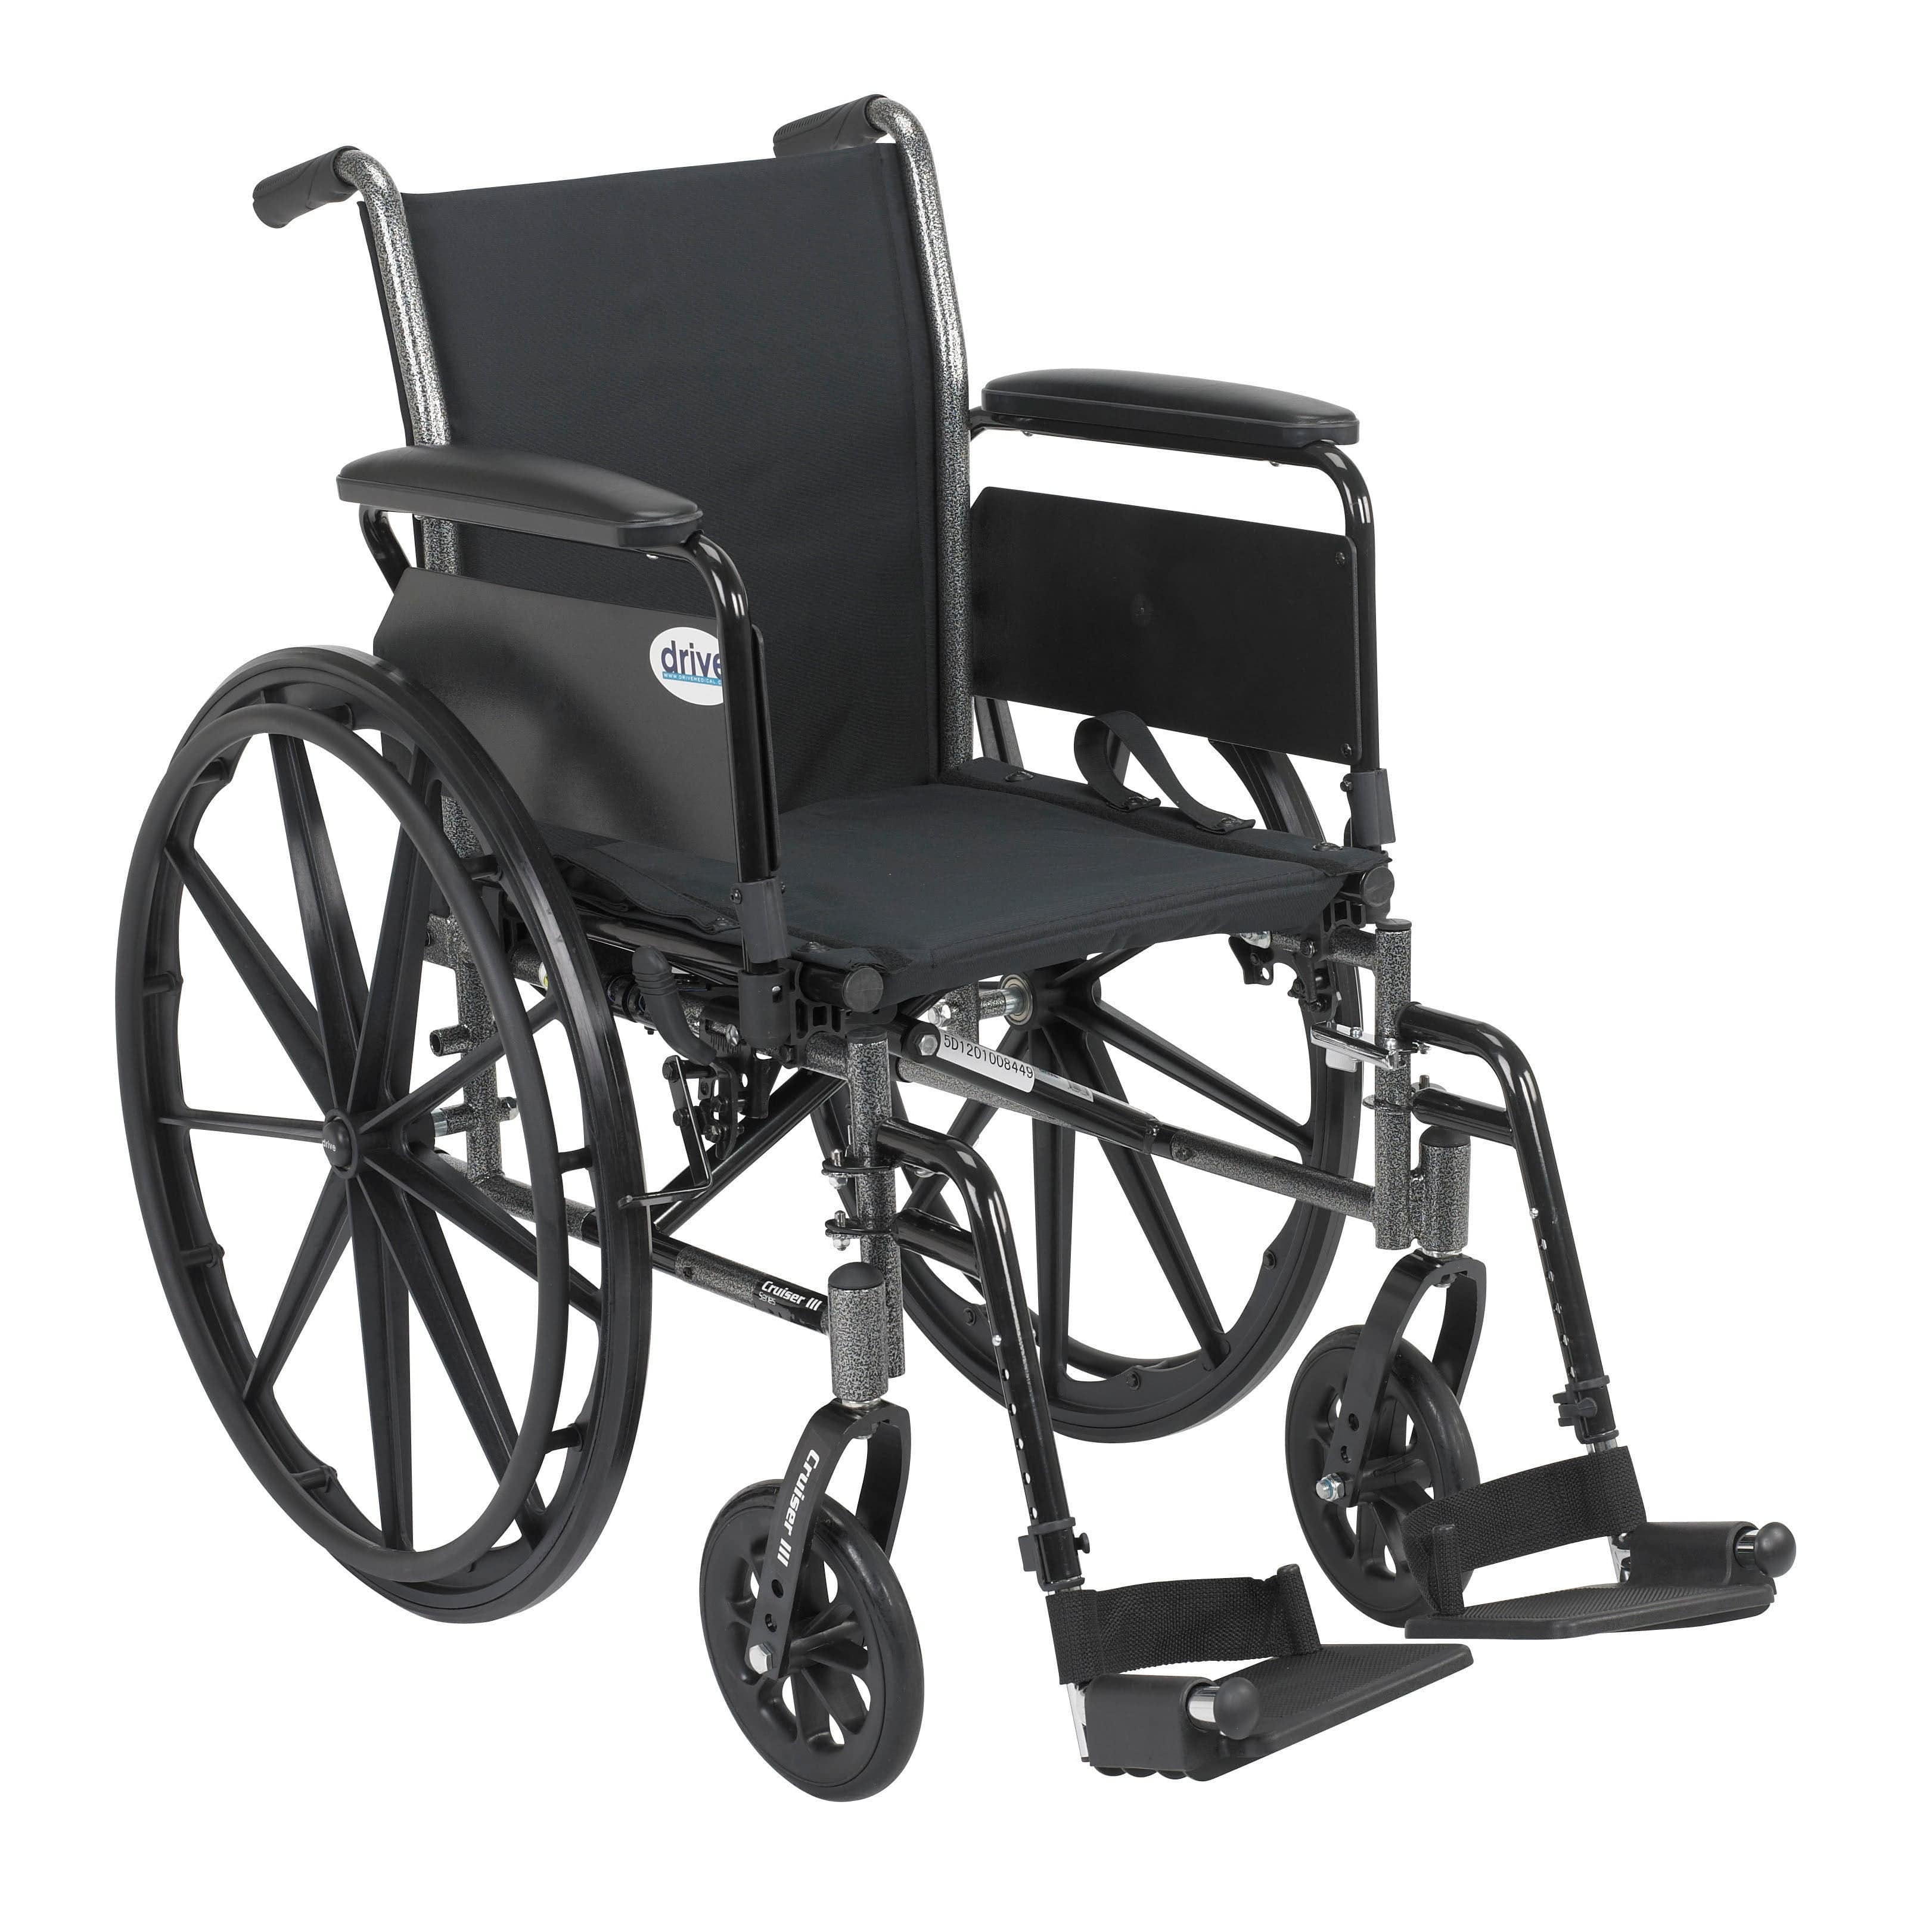 Drive Medical Wheelchairs Flip Back Removable Full Arms and Swing away Footrests / 20" Seat Drive Medical Cruiser III Light Weight Wheelchair with Flip Back Removable Arms